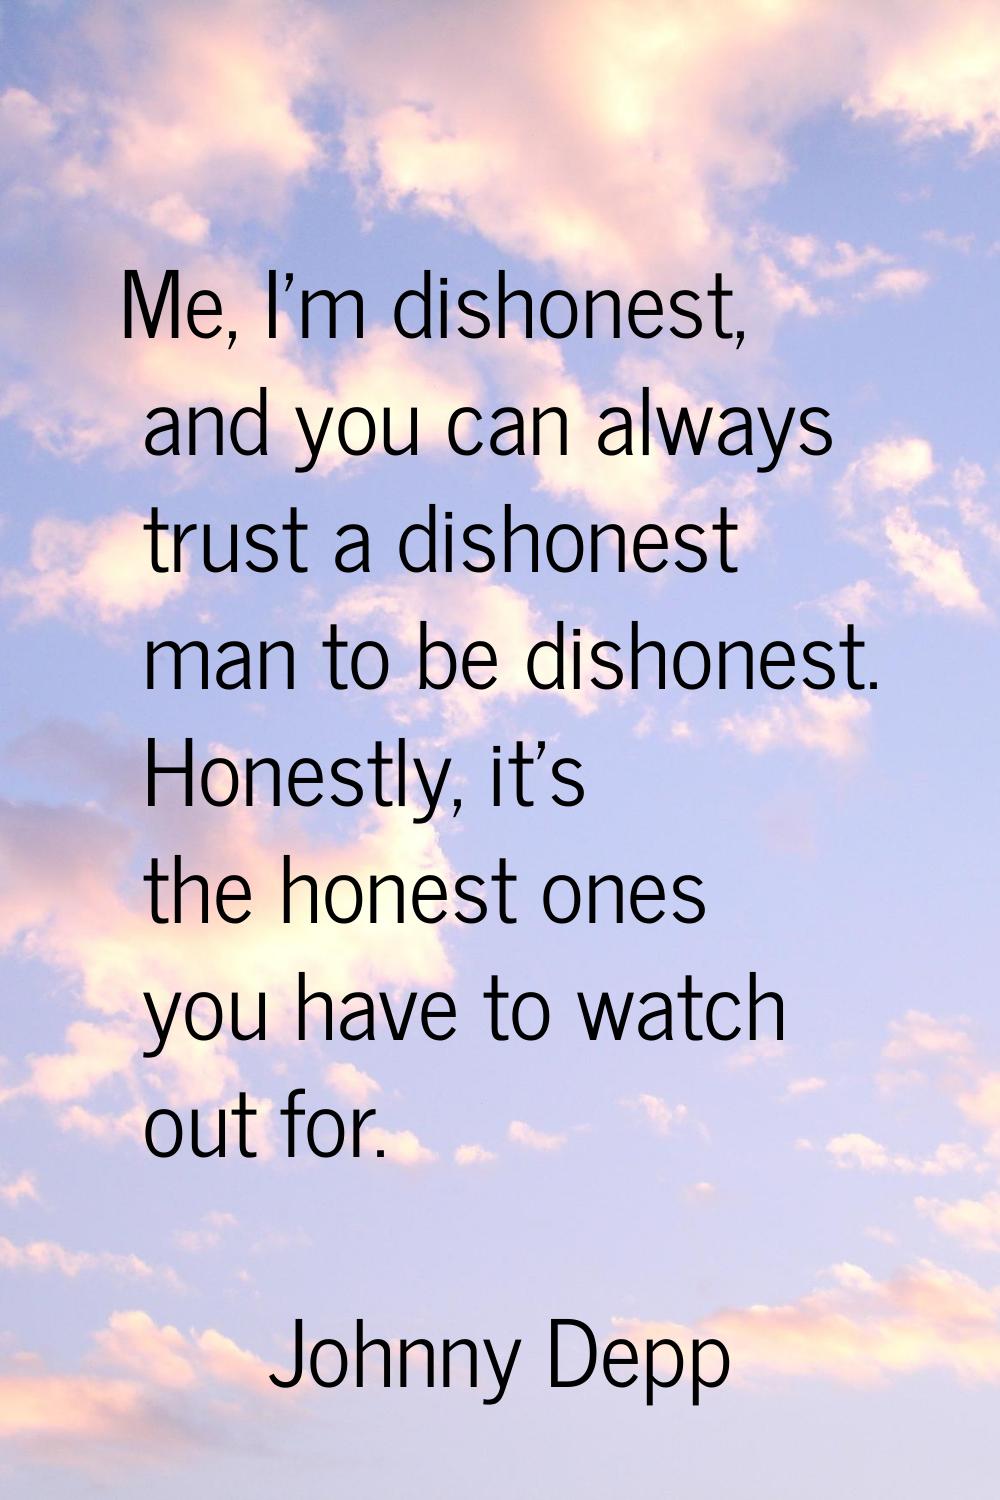 Me, I'm dishonest, and you can always trust a dishonest man to be dishonest. Honestly, it's the hon